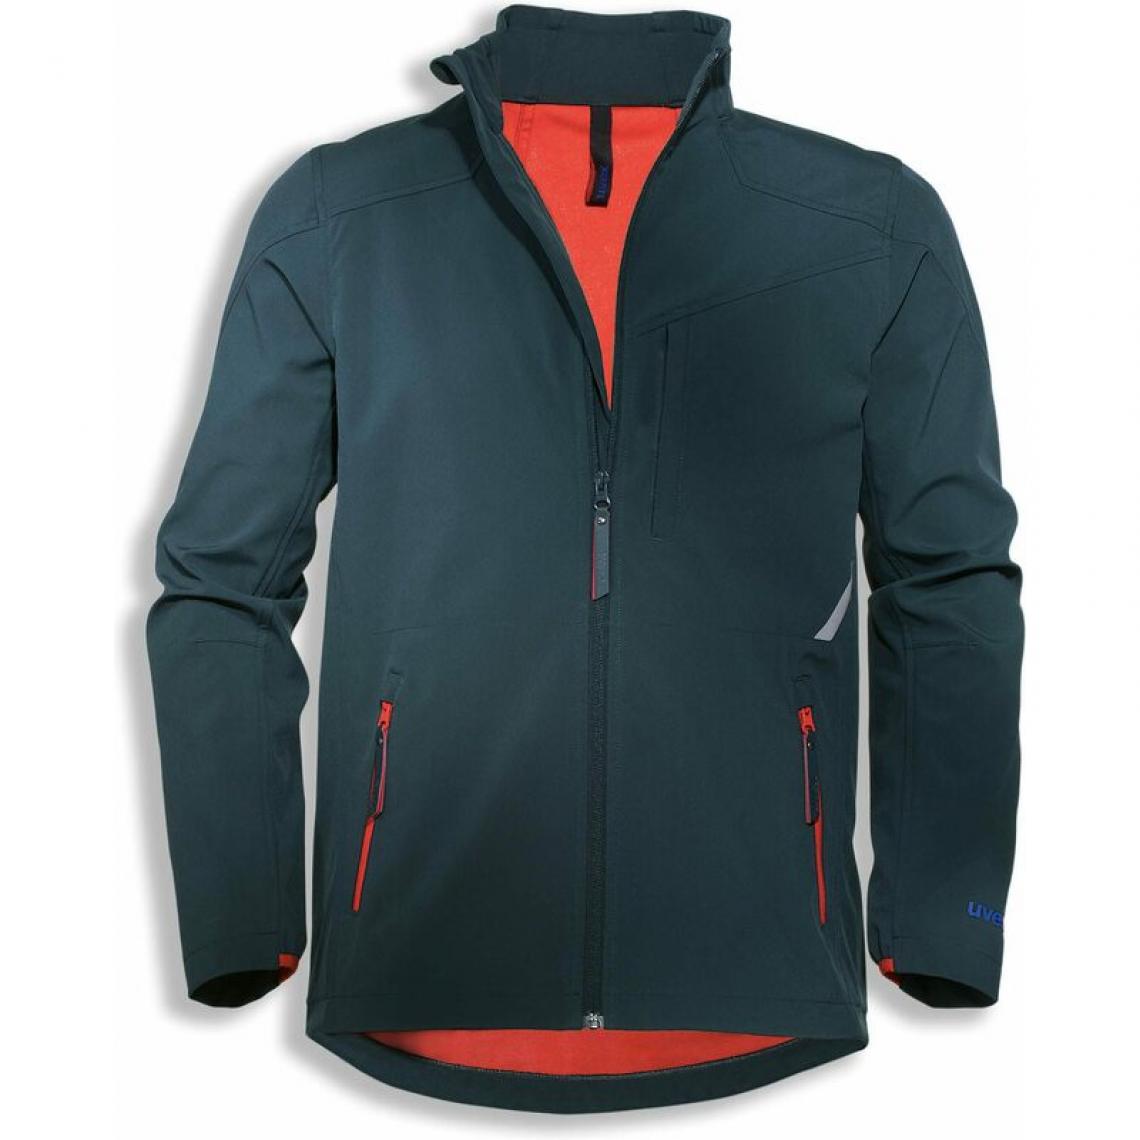 Uvex - uvex Veste Softshell suXXeed, L, bleu nuit () - Protections corps